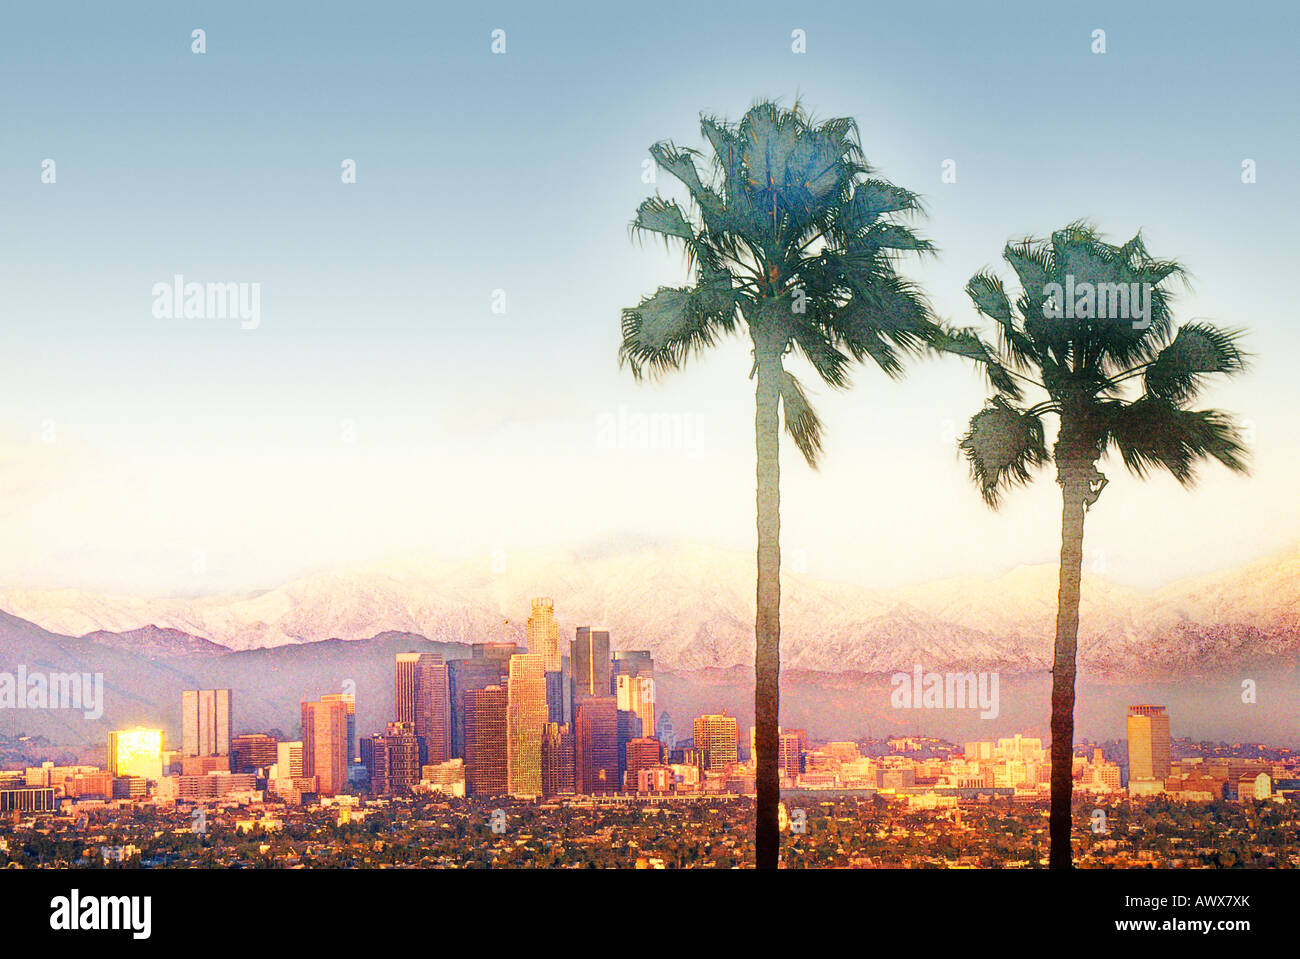 Digitally altered artistic view of Los Angeles, CA skyline and palm trees Stock Photo